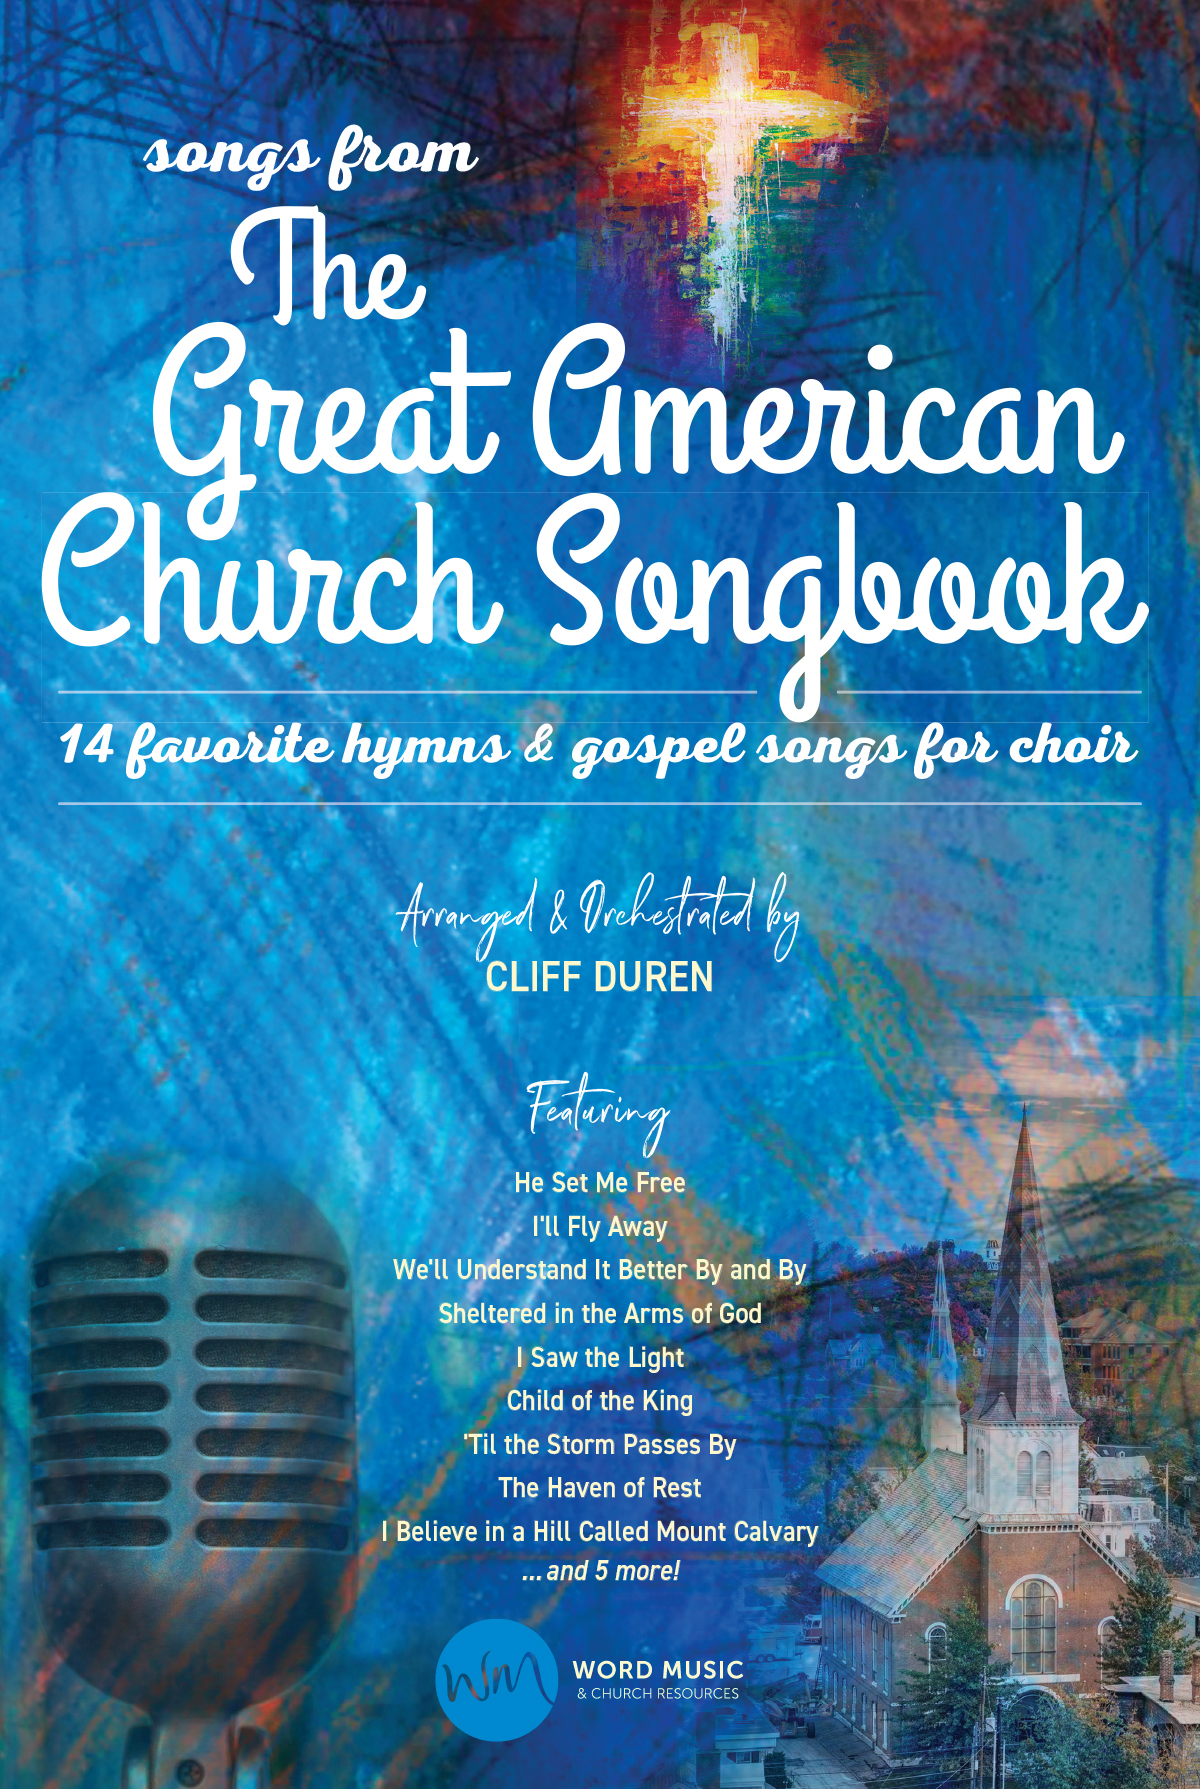 The Great American Church Songbook